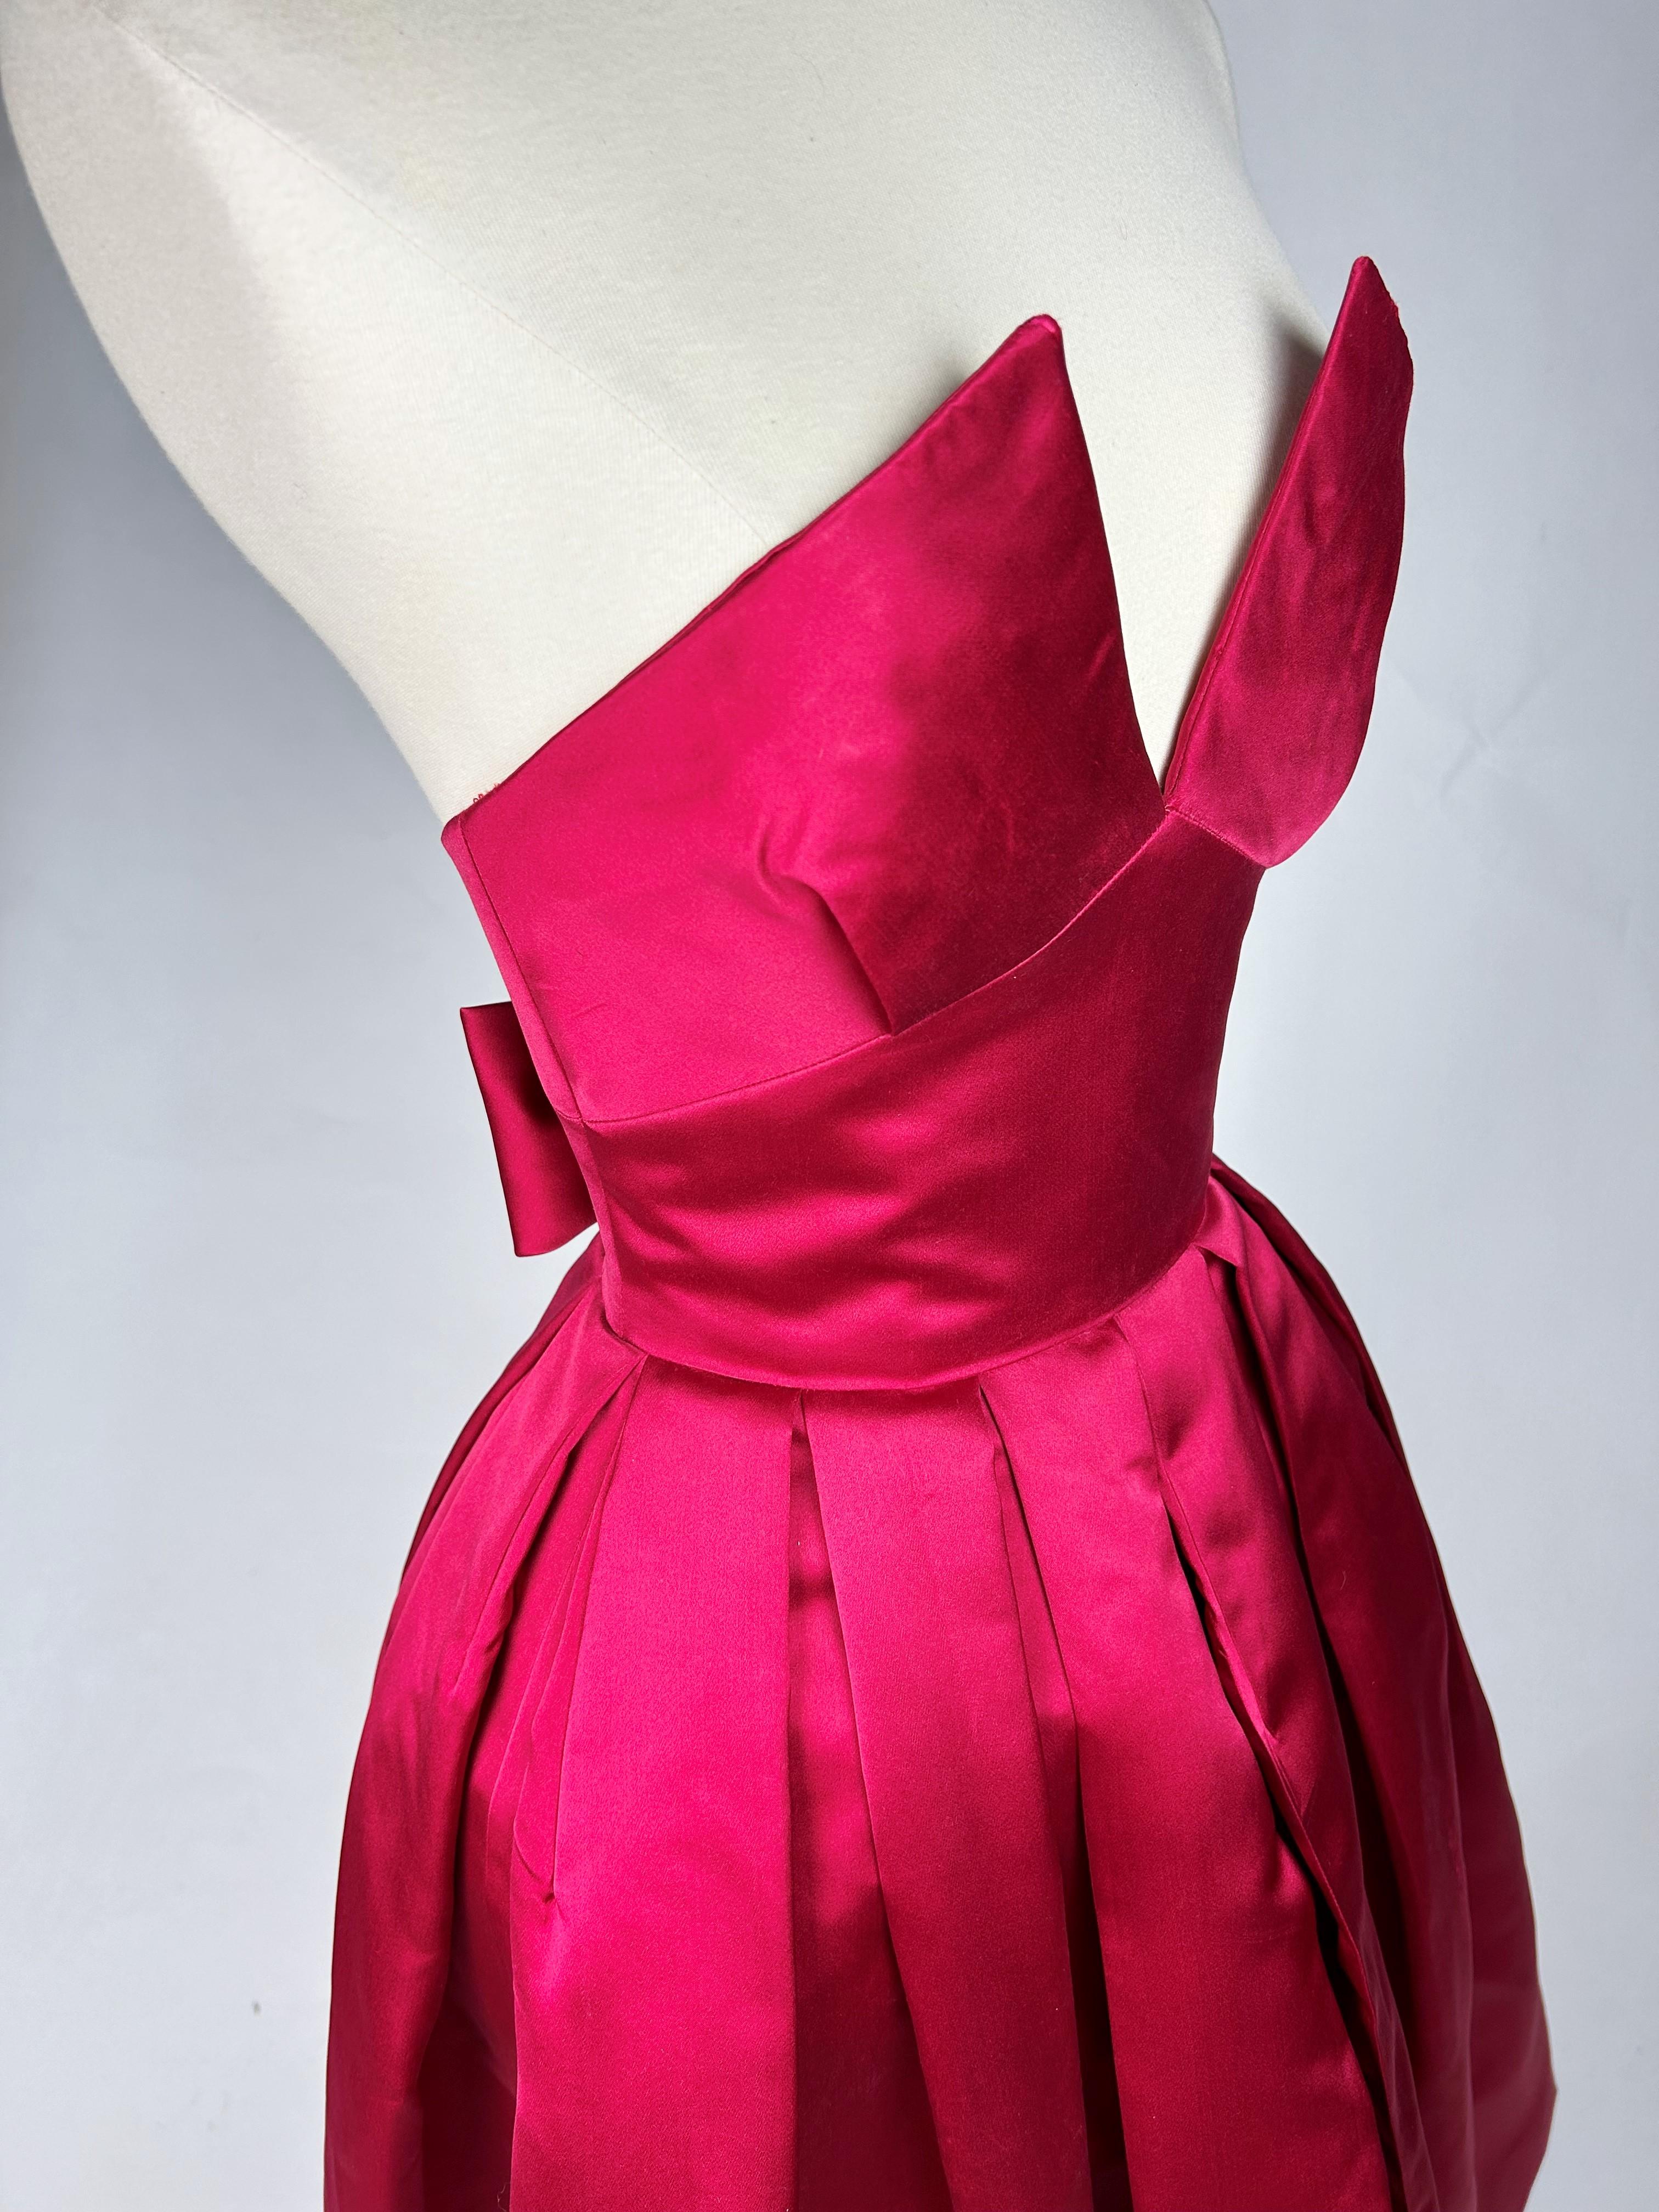 Cocktail dress in raspberry satin in the style of Christian Dior - Paris C. 1955 4